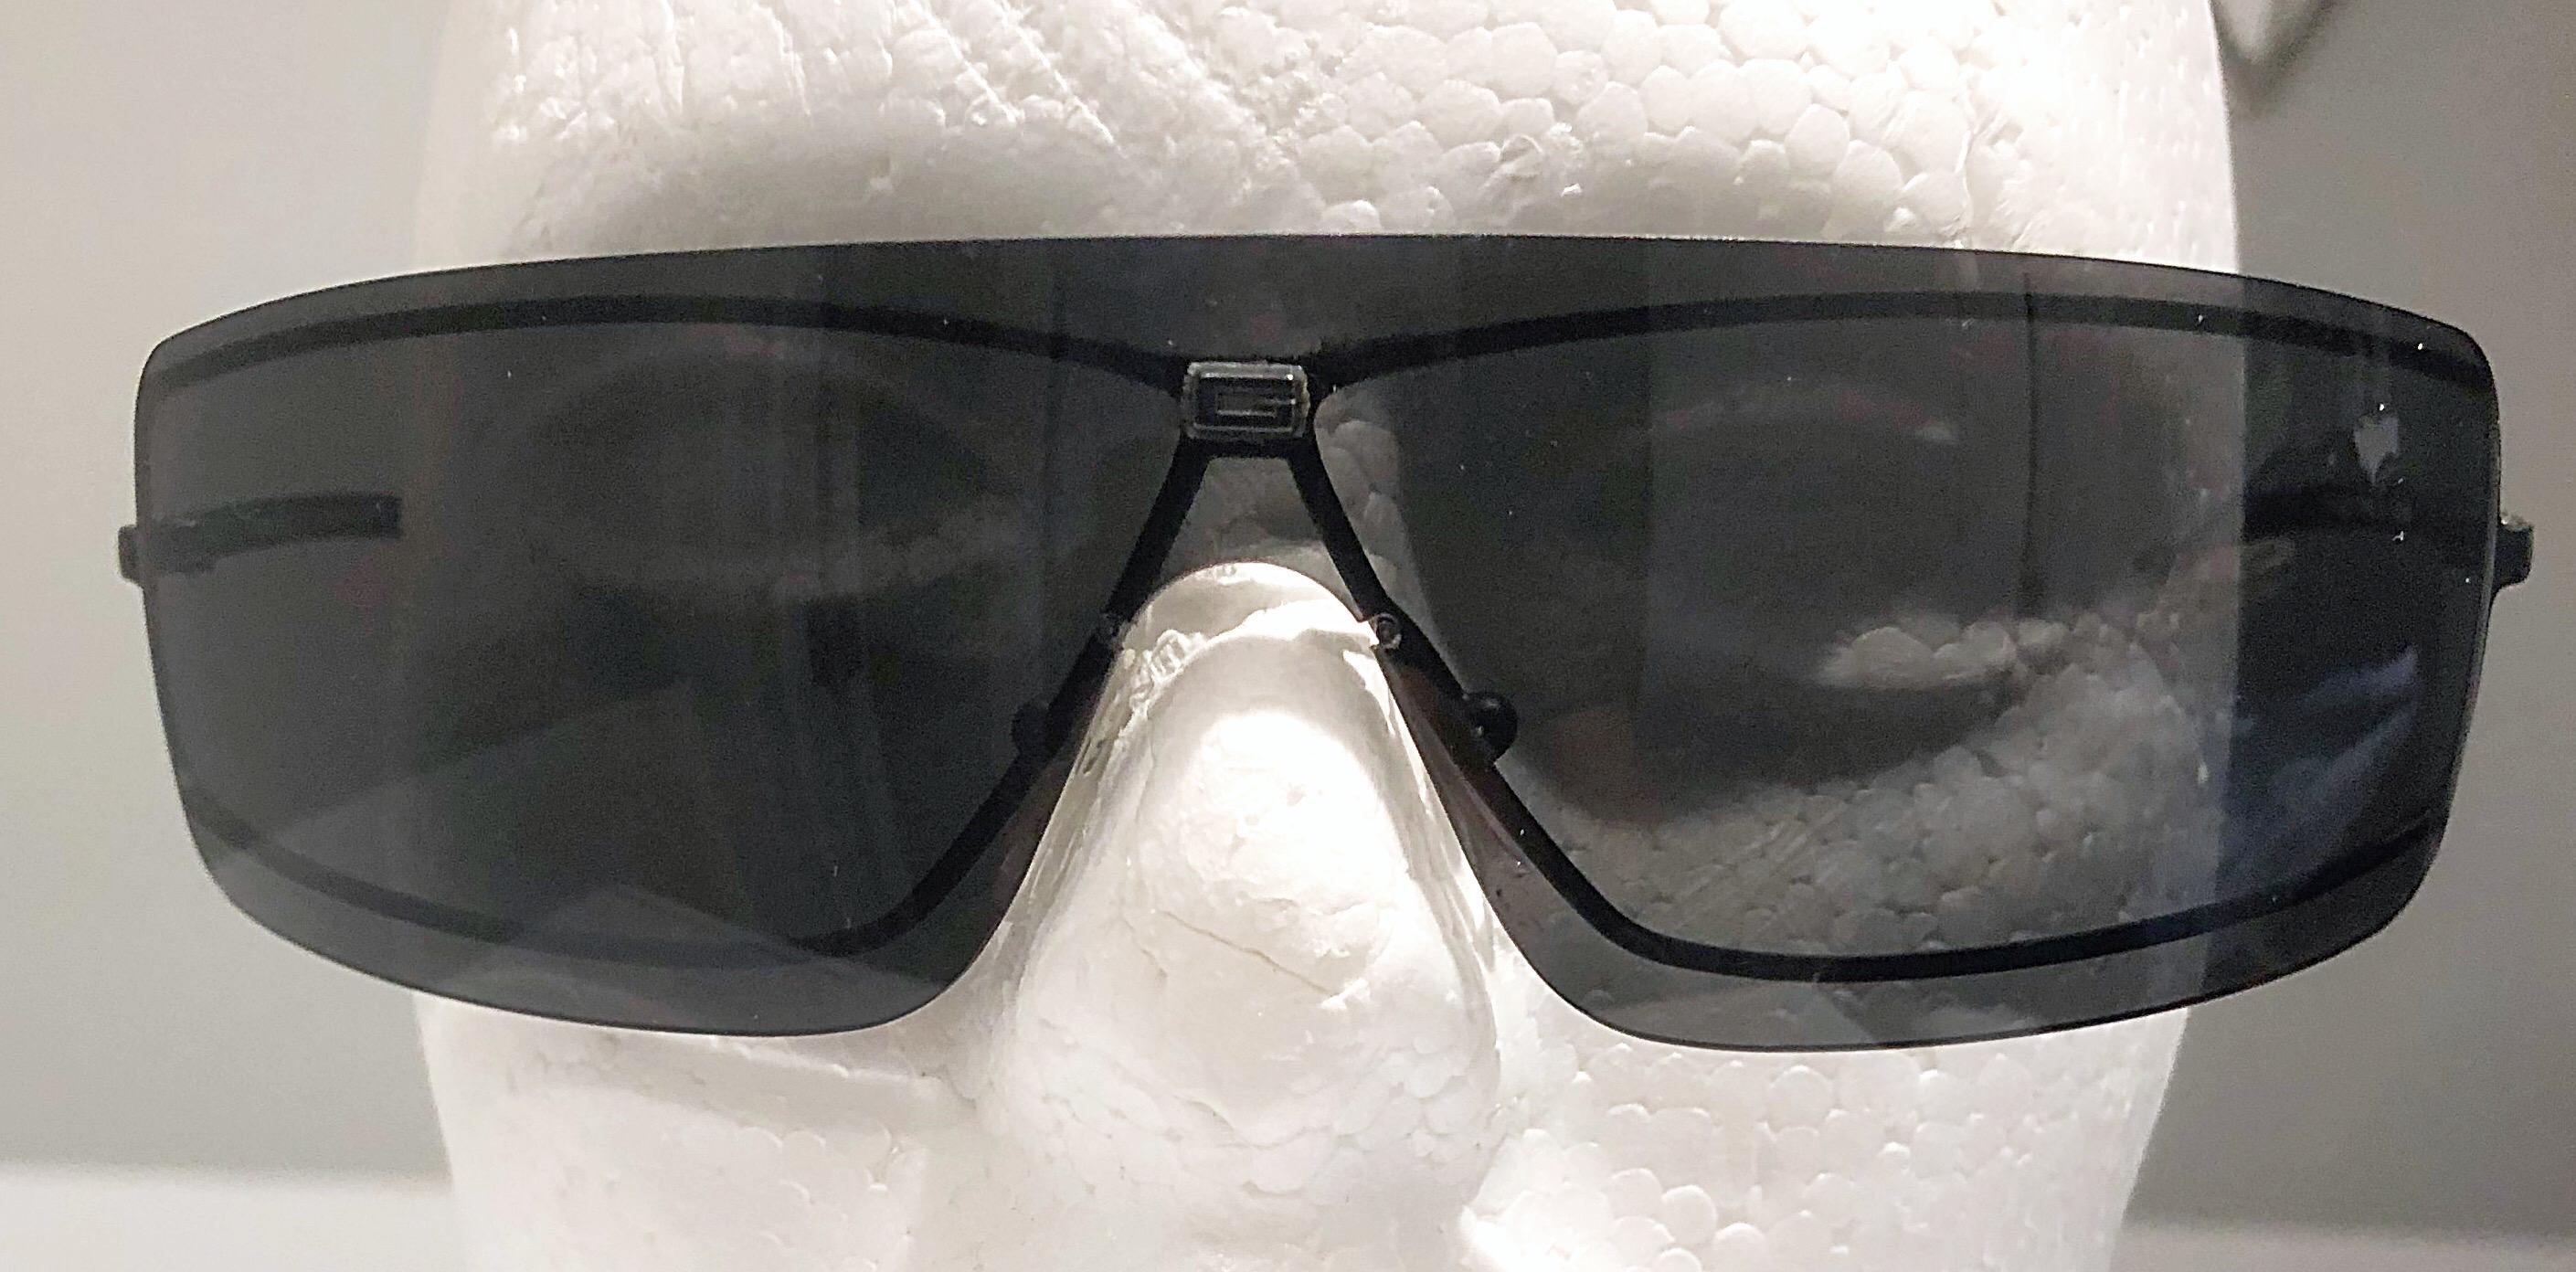 Rare and collectible GUCCI by TOM FORD black / gray Matrix style rimless sunglasses ! G Gucci logo at center front, and on each side.
Style number GG 1710/S 3G3M8
Can be worn by either a man or a woman
Made in Italy
In great condition with no